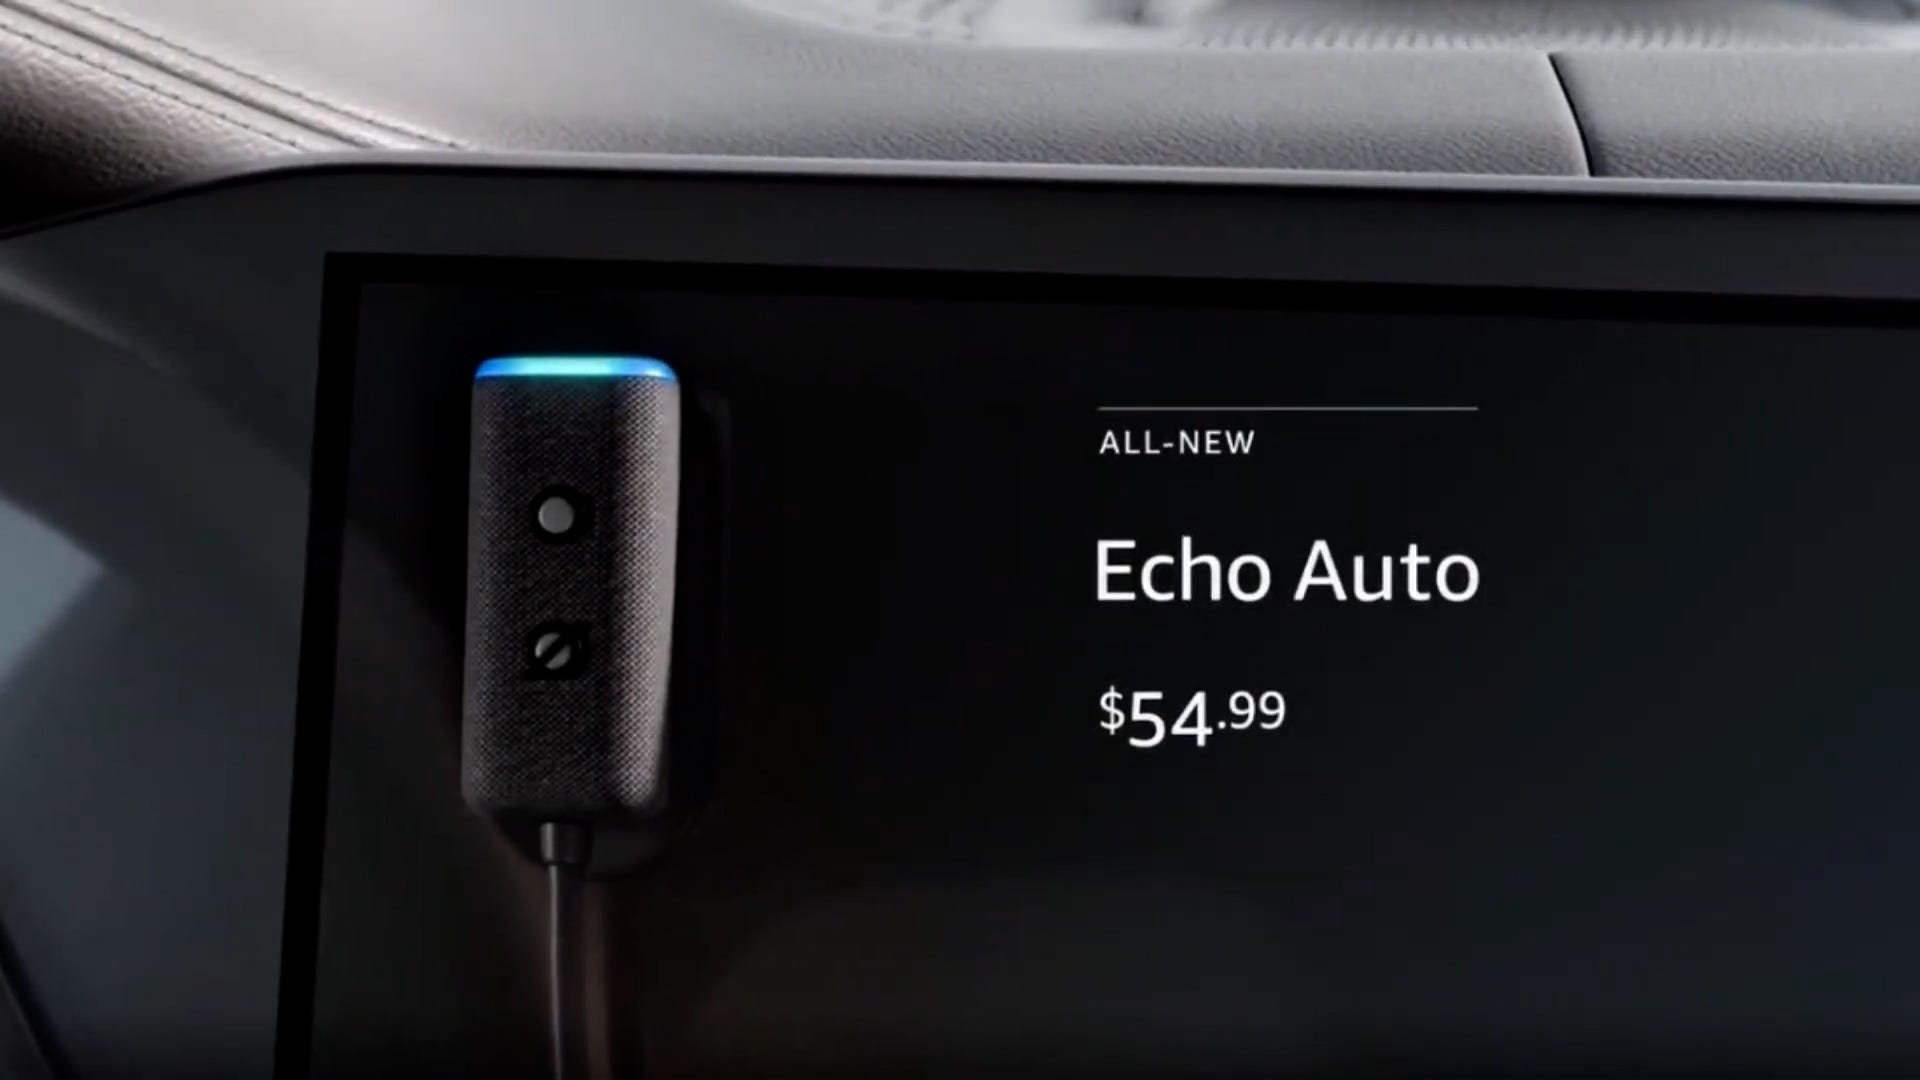 Echo Auto (2nd Gen) review: Alexa for your car just got a big upgrade